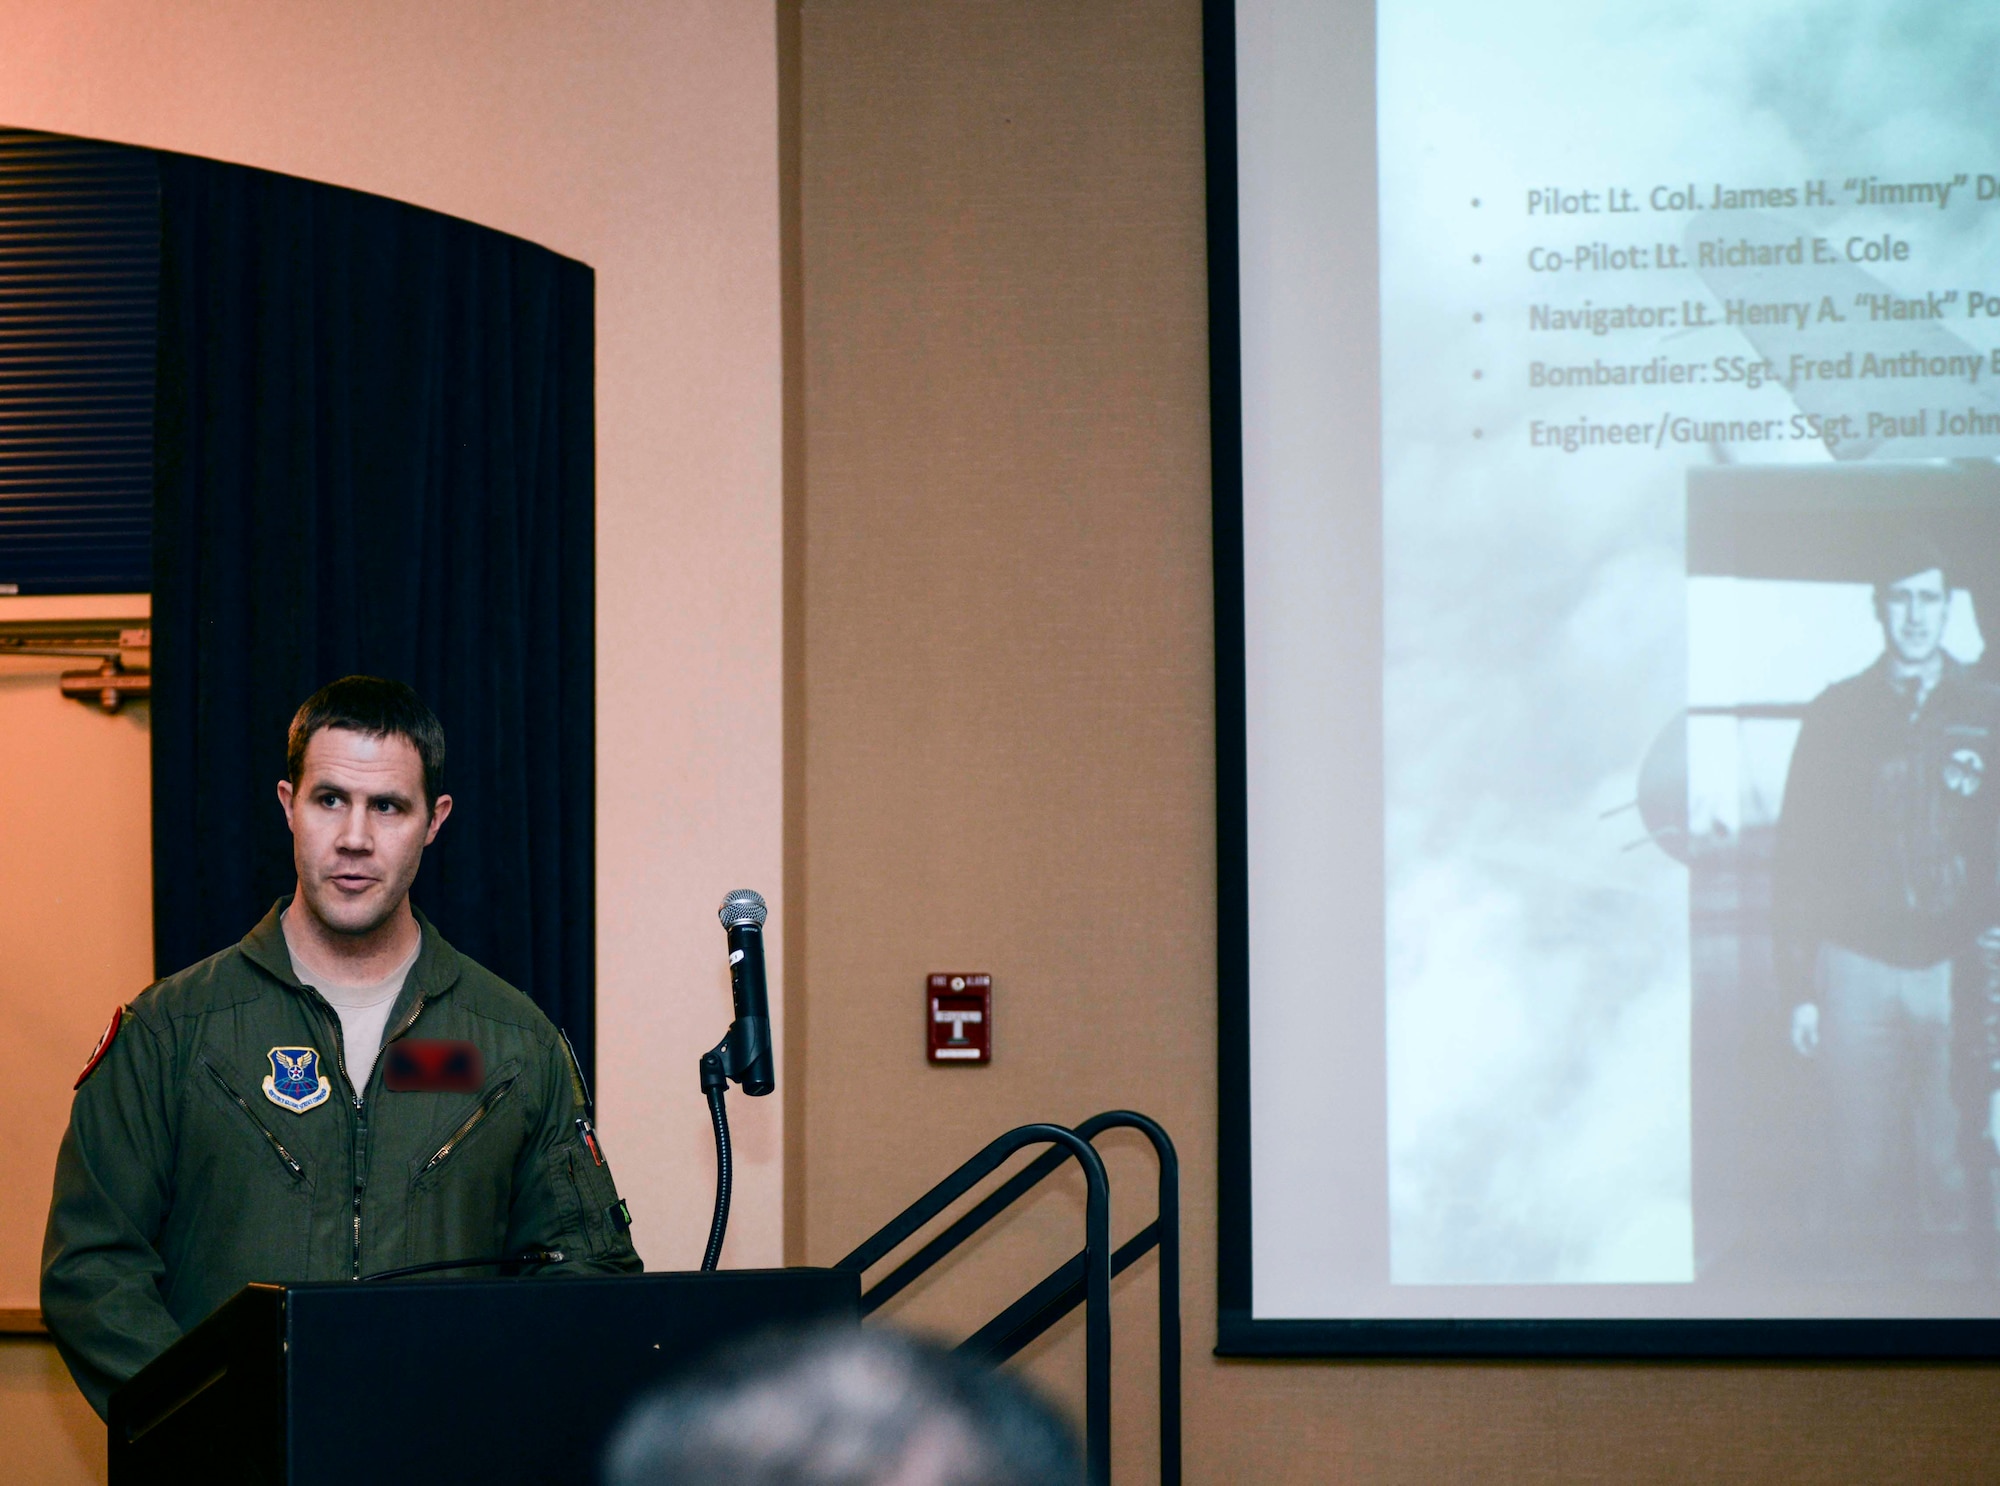 Maj. Brian, 34th Bomb Squadron assistant director of operation instructor pilot, speaks about the first crew of the Doolittle Raid during the Doolittle Raider toast ceremony at Ellsworth Air Force Base, S.D., April 18, 2016. Lt. Col. James Doolittle launched 16 B-25 aircraft for the Doolittle Raid, leading 80 pilots who were the first to fly bomber aircraft from a carrier deck, USS Hornet, and led to the first victory of World War II. (U.S. Air Force photo by Airman 1st Class Sadie Colbert/Released)